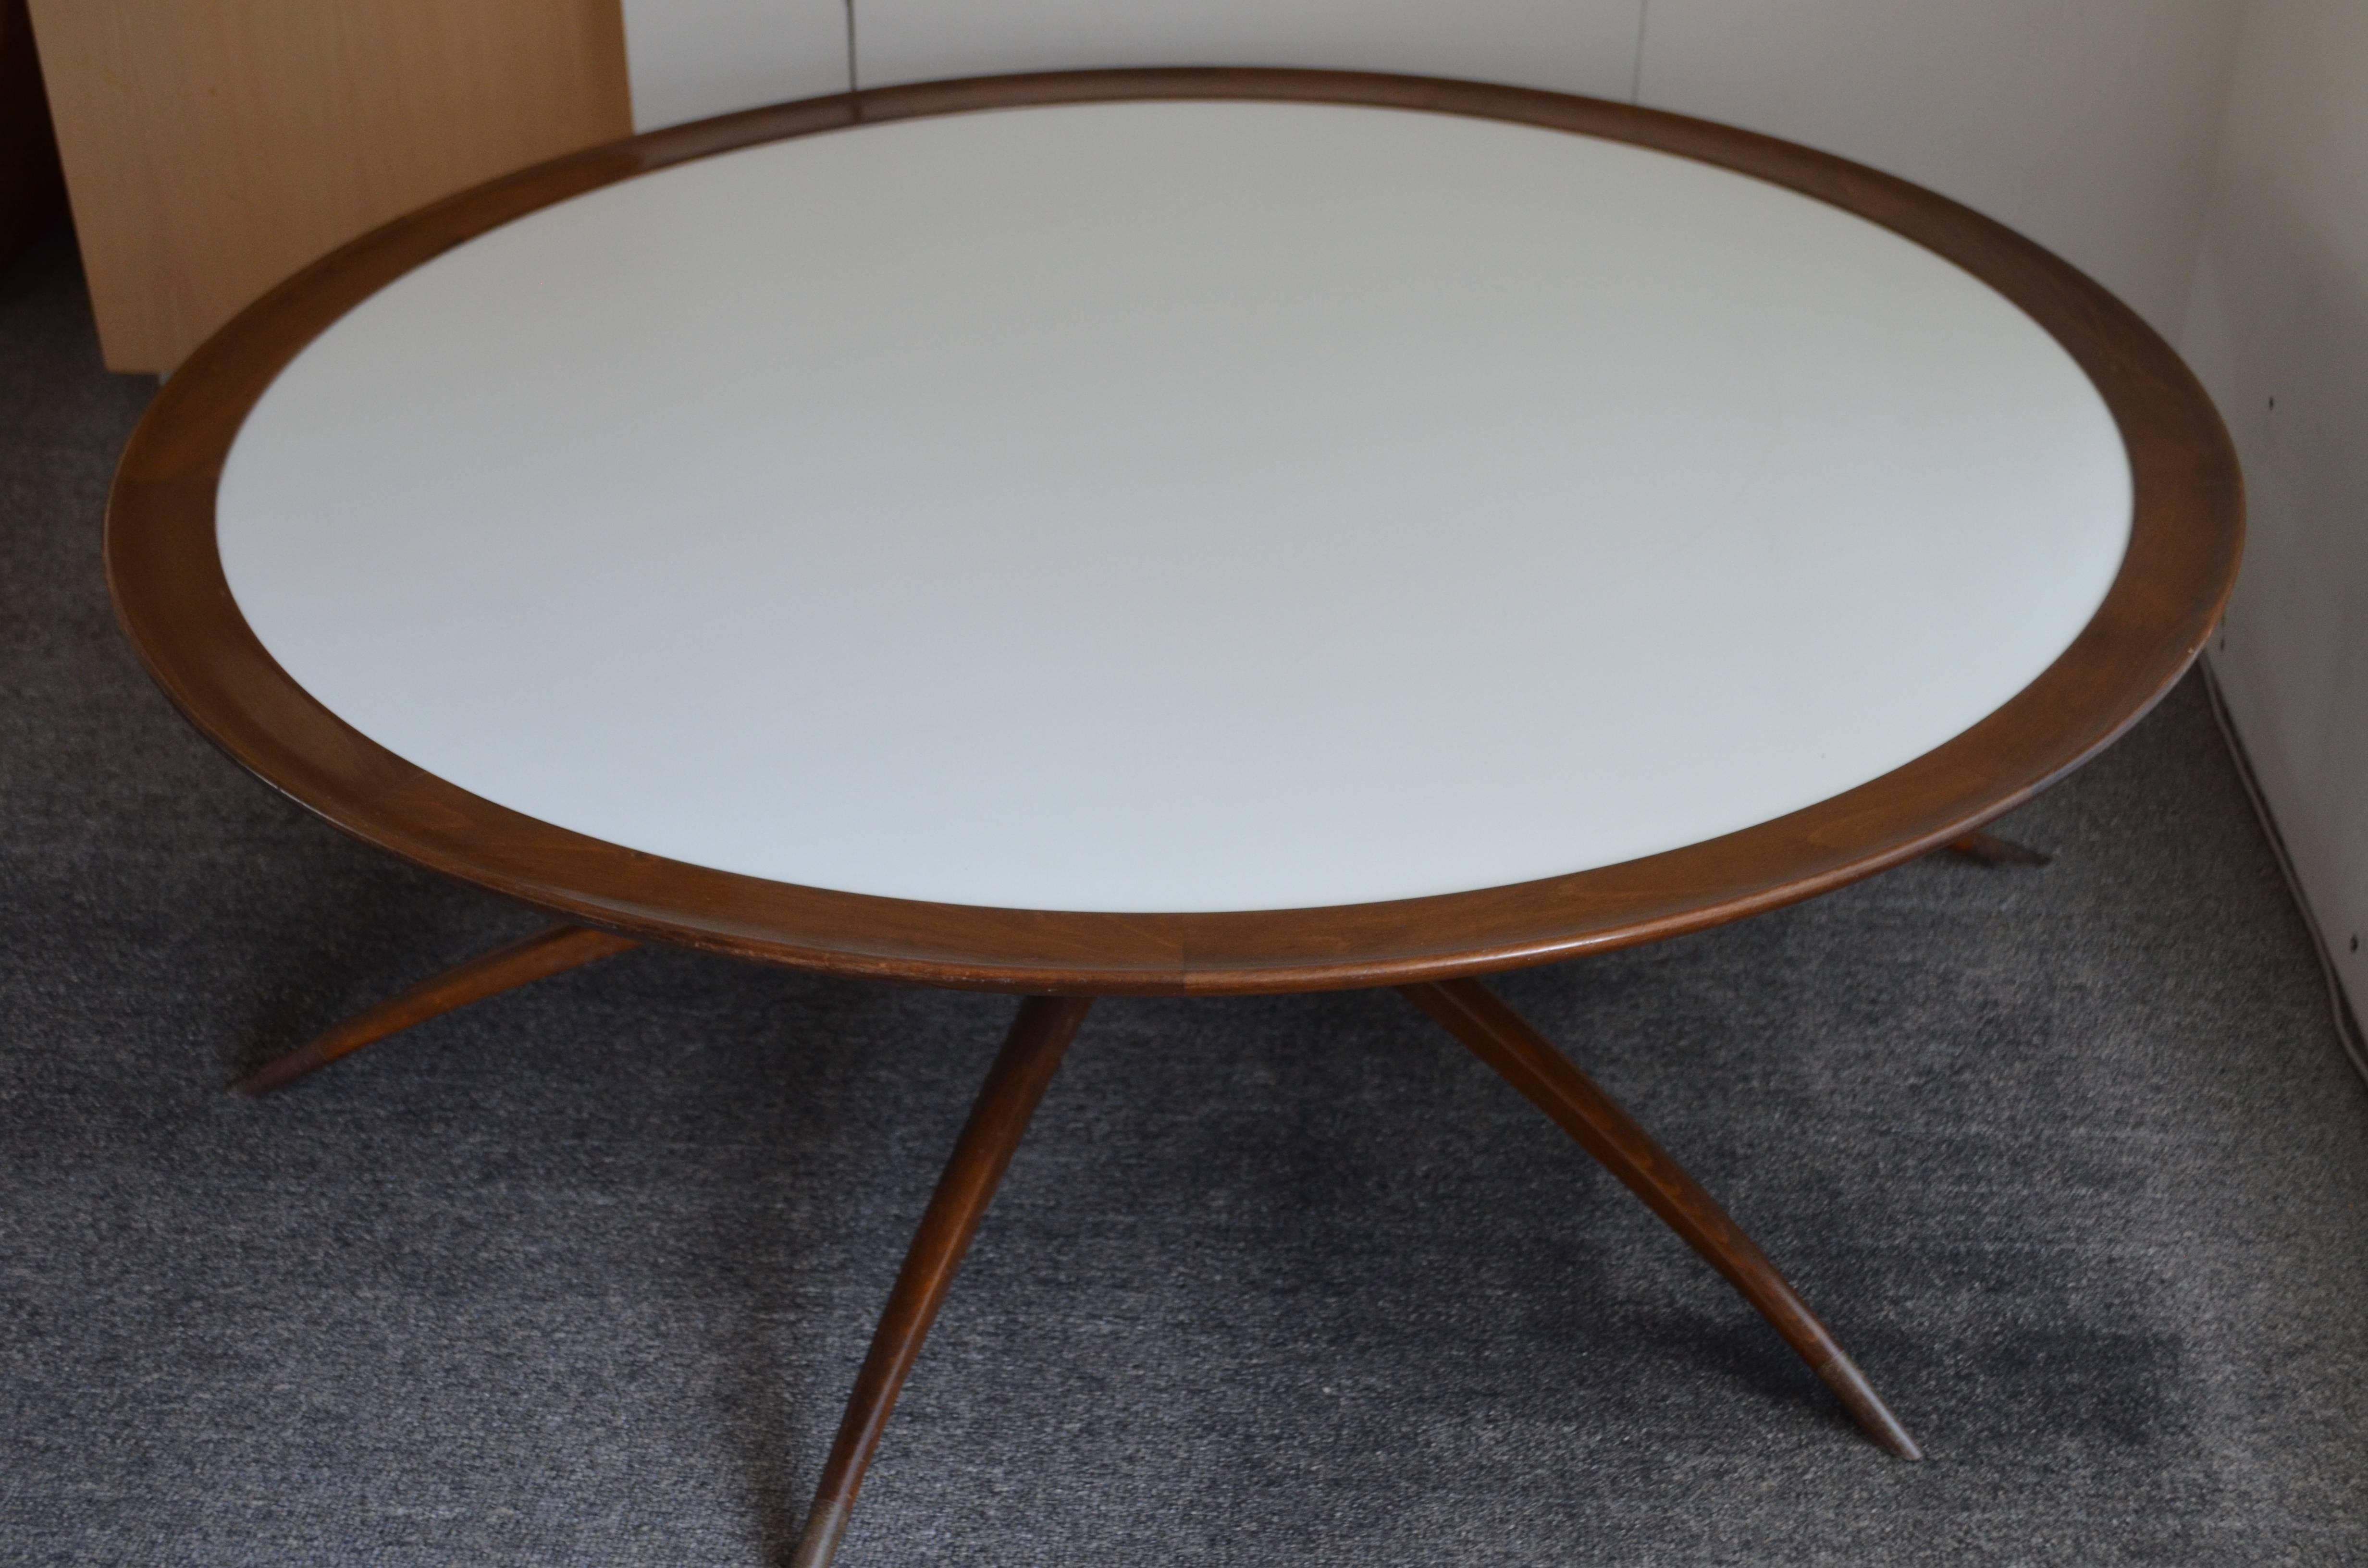 Danish coffee table with spider leg base and milk glass top with walnut surround. Attributed to Carlo di Carli. Spider legs of the base are tipped in brass. Base folds up neatly for easy transport. Milk glass top with walnut surround is stunning. An